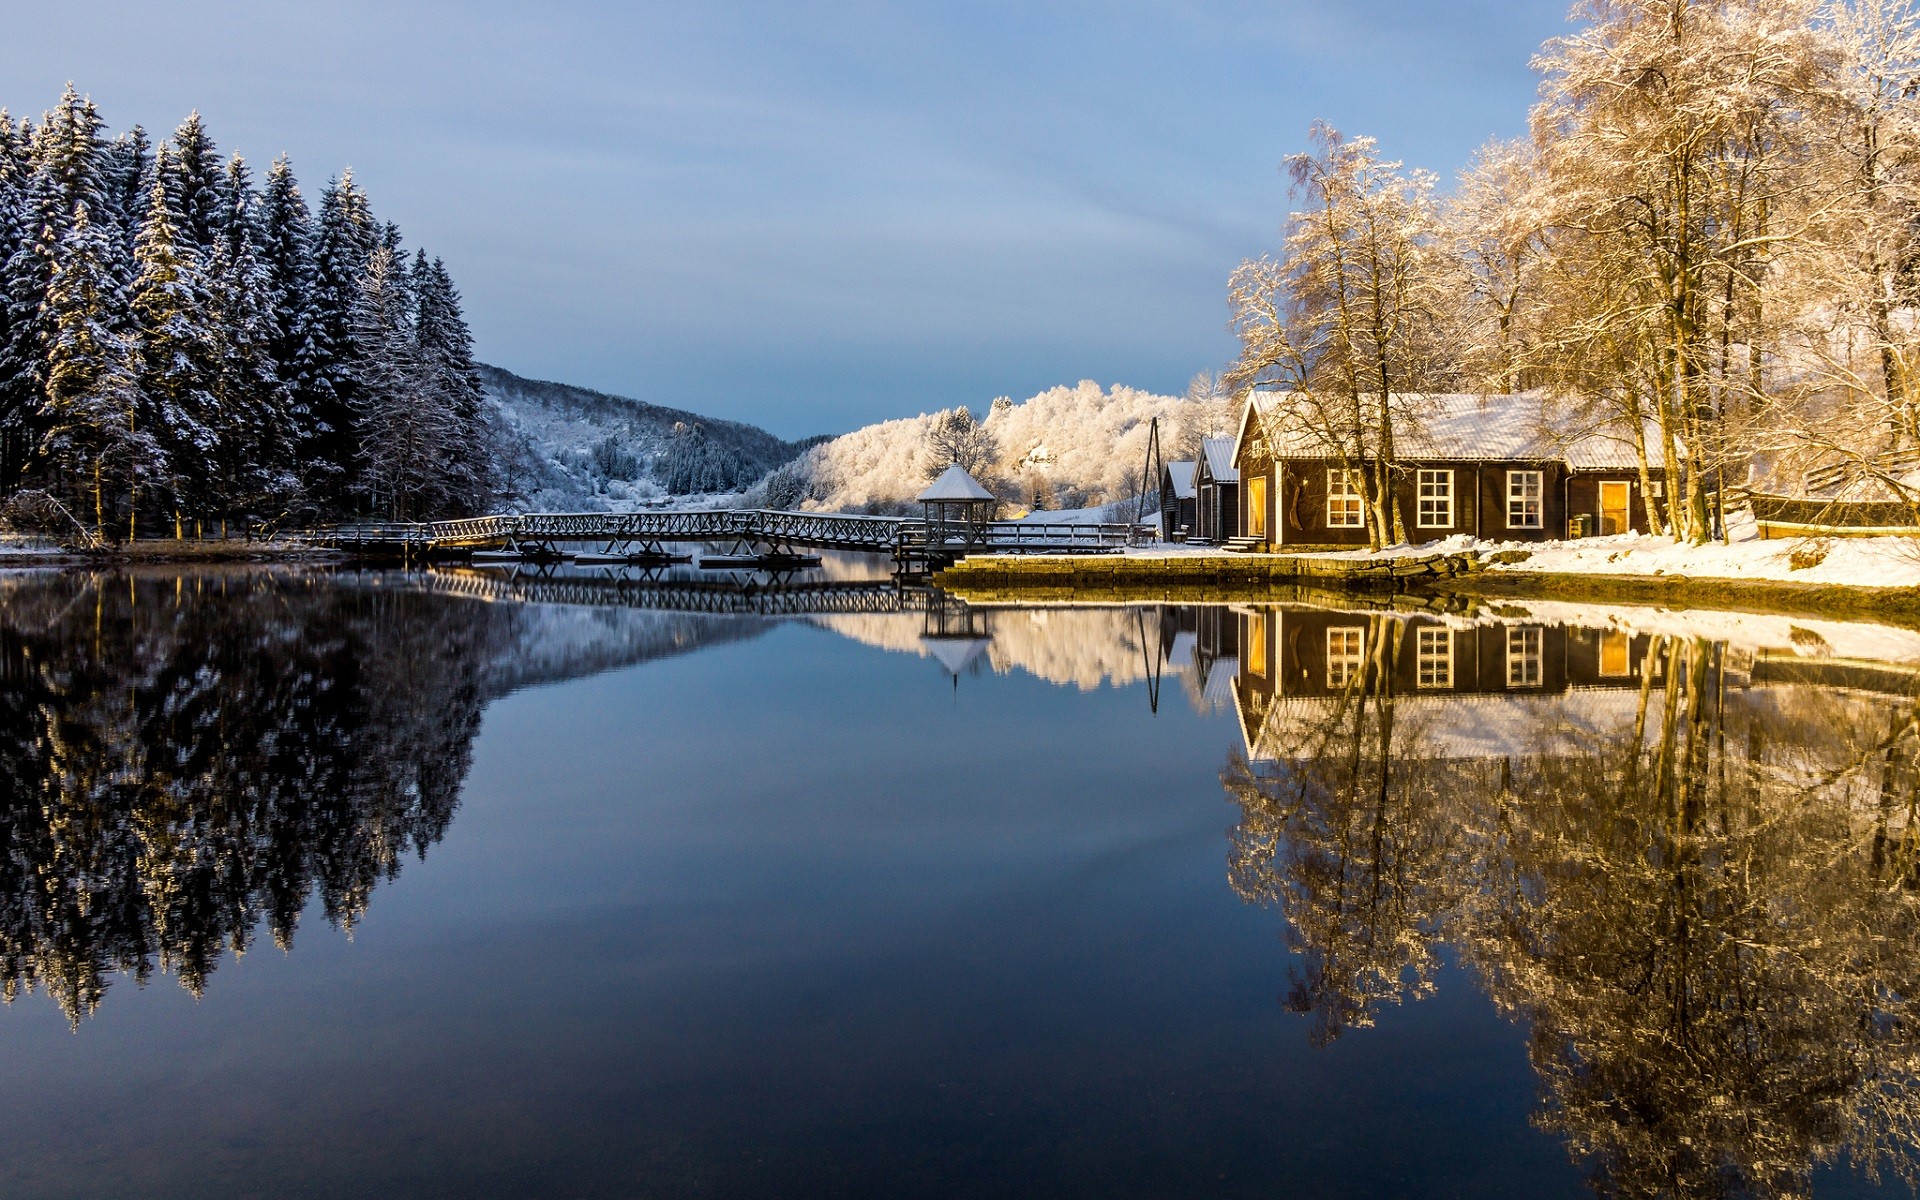 General 1920x1200 nature water reflection trees snow winter building landscape cold outdoors calm waters calm